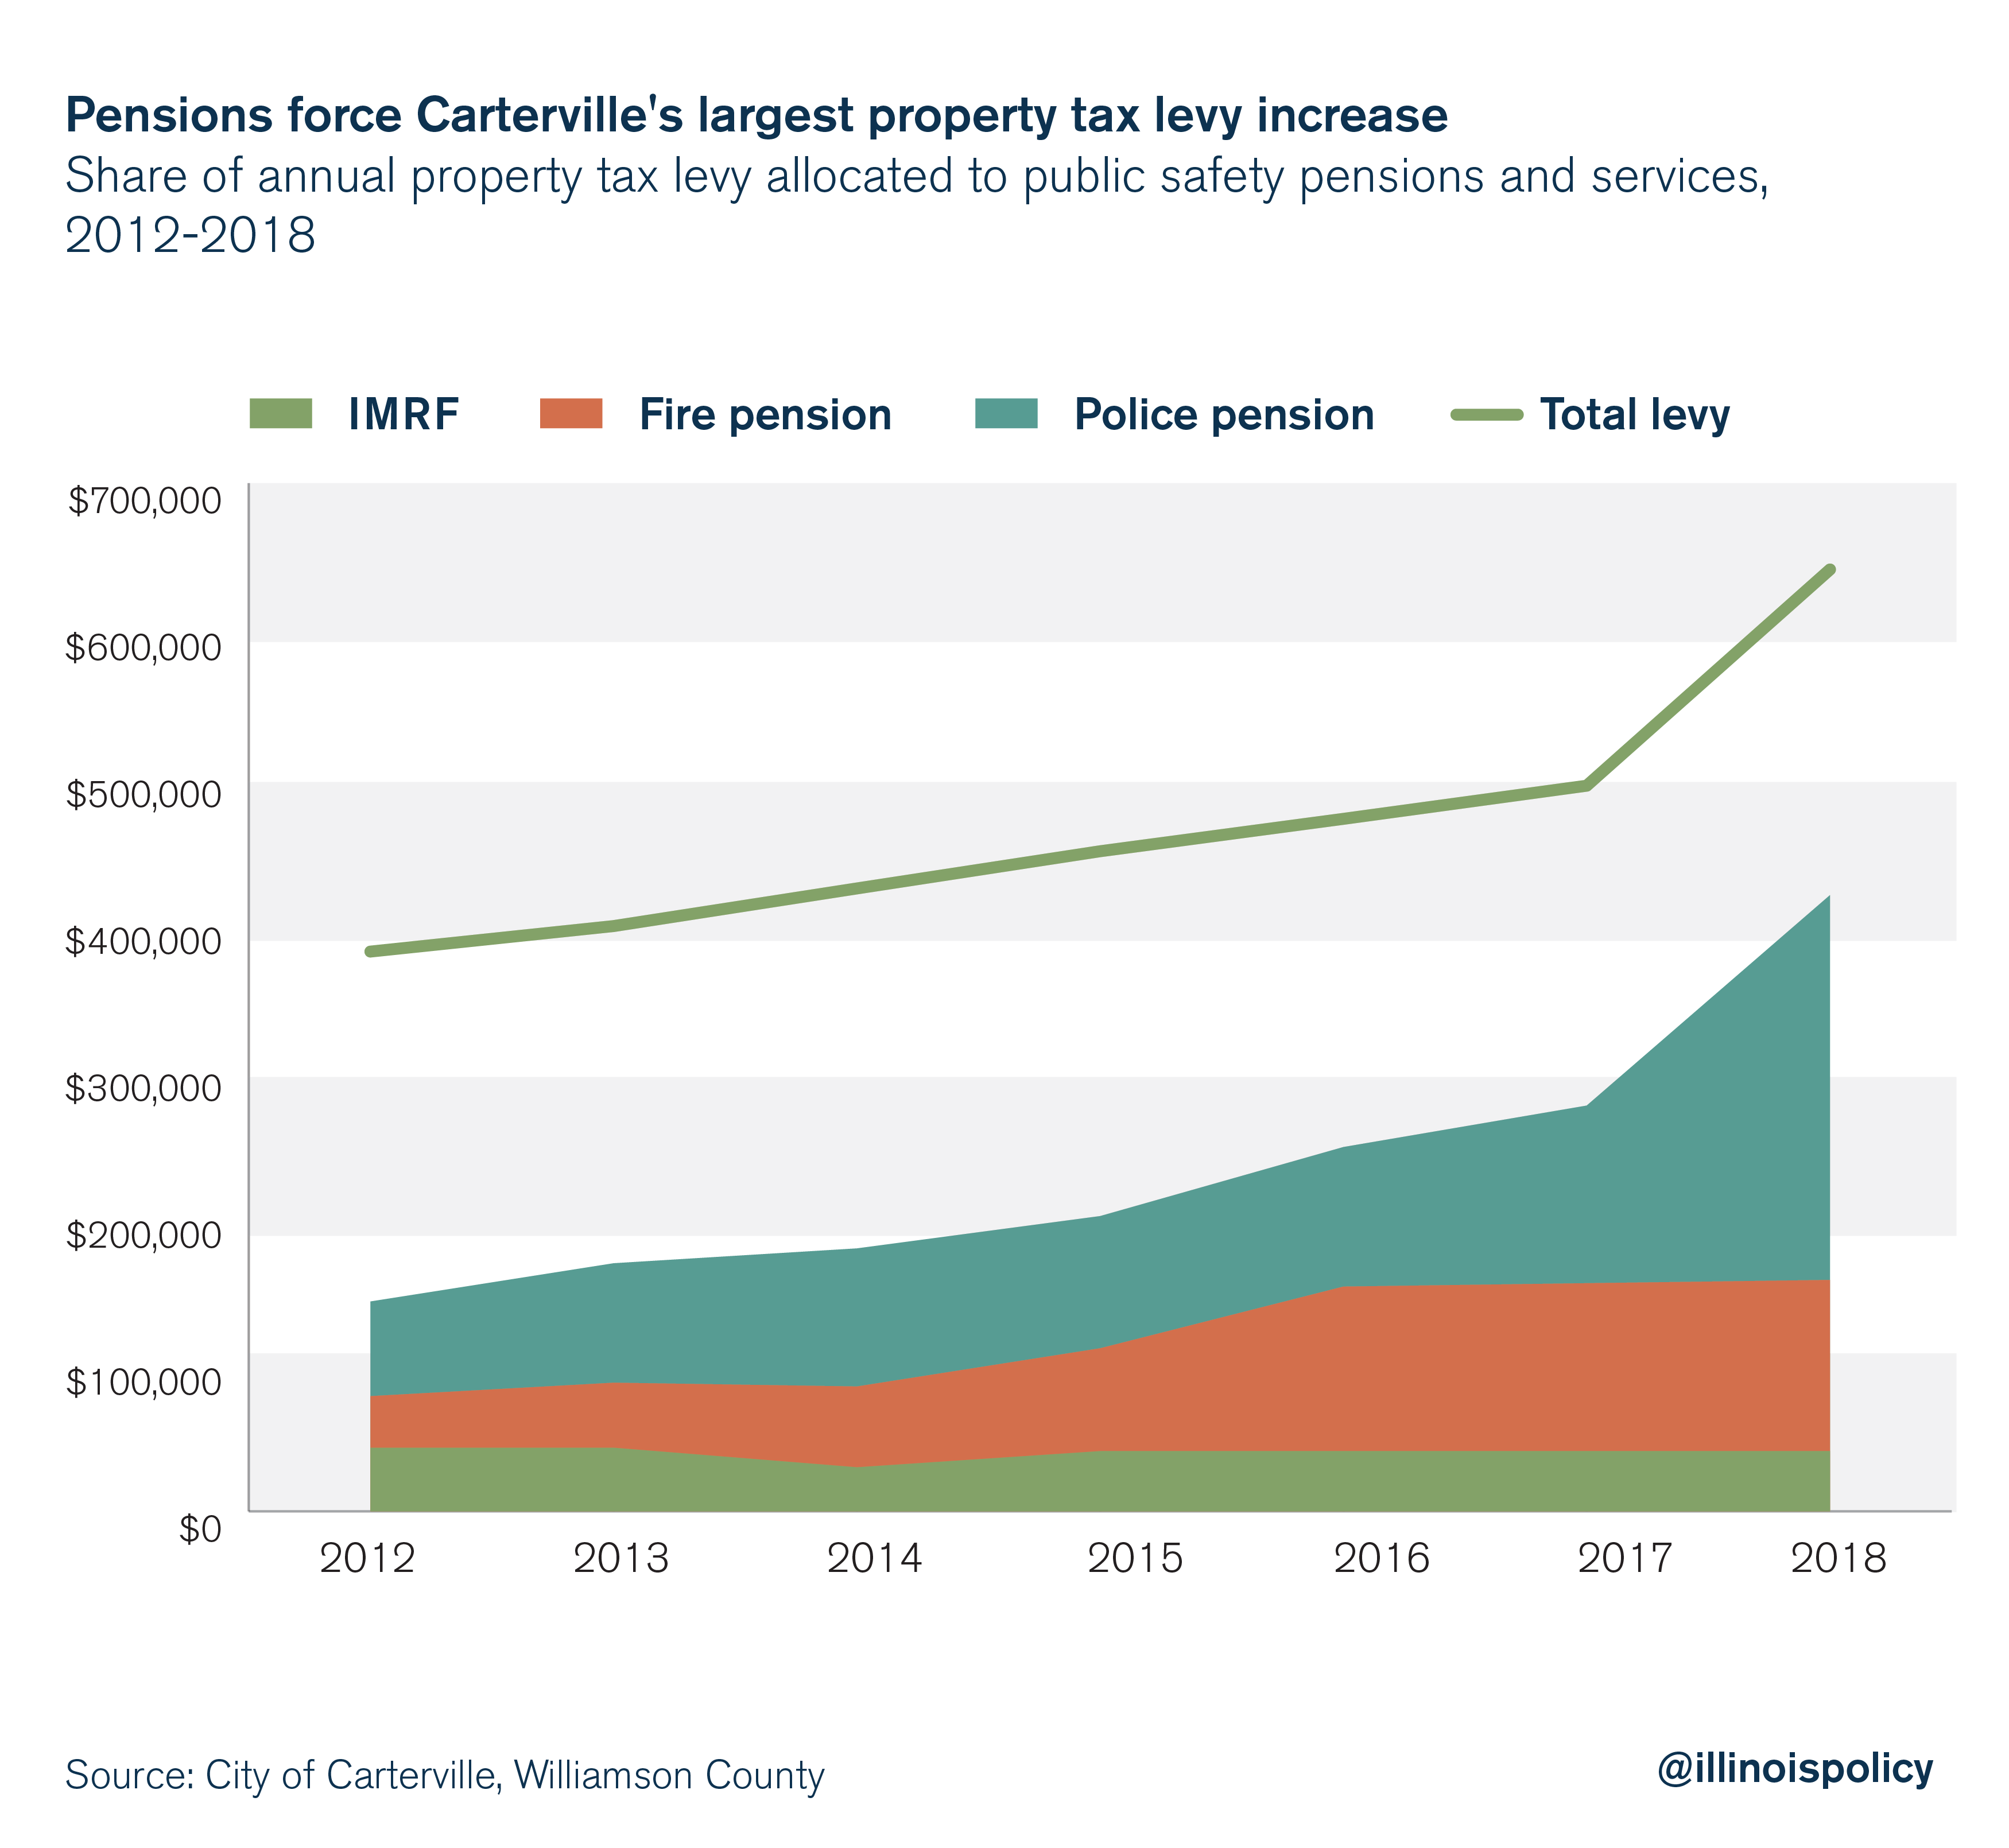 Pensions force Carterville's largest property tax levy increase